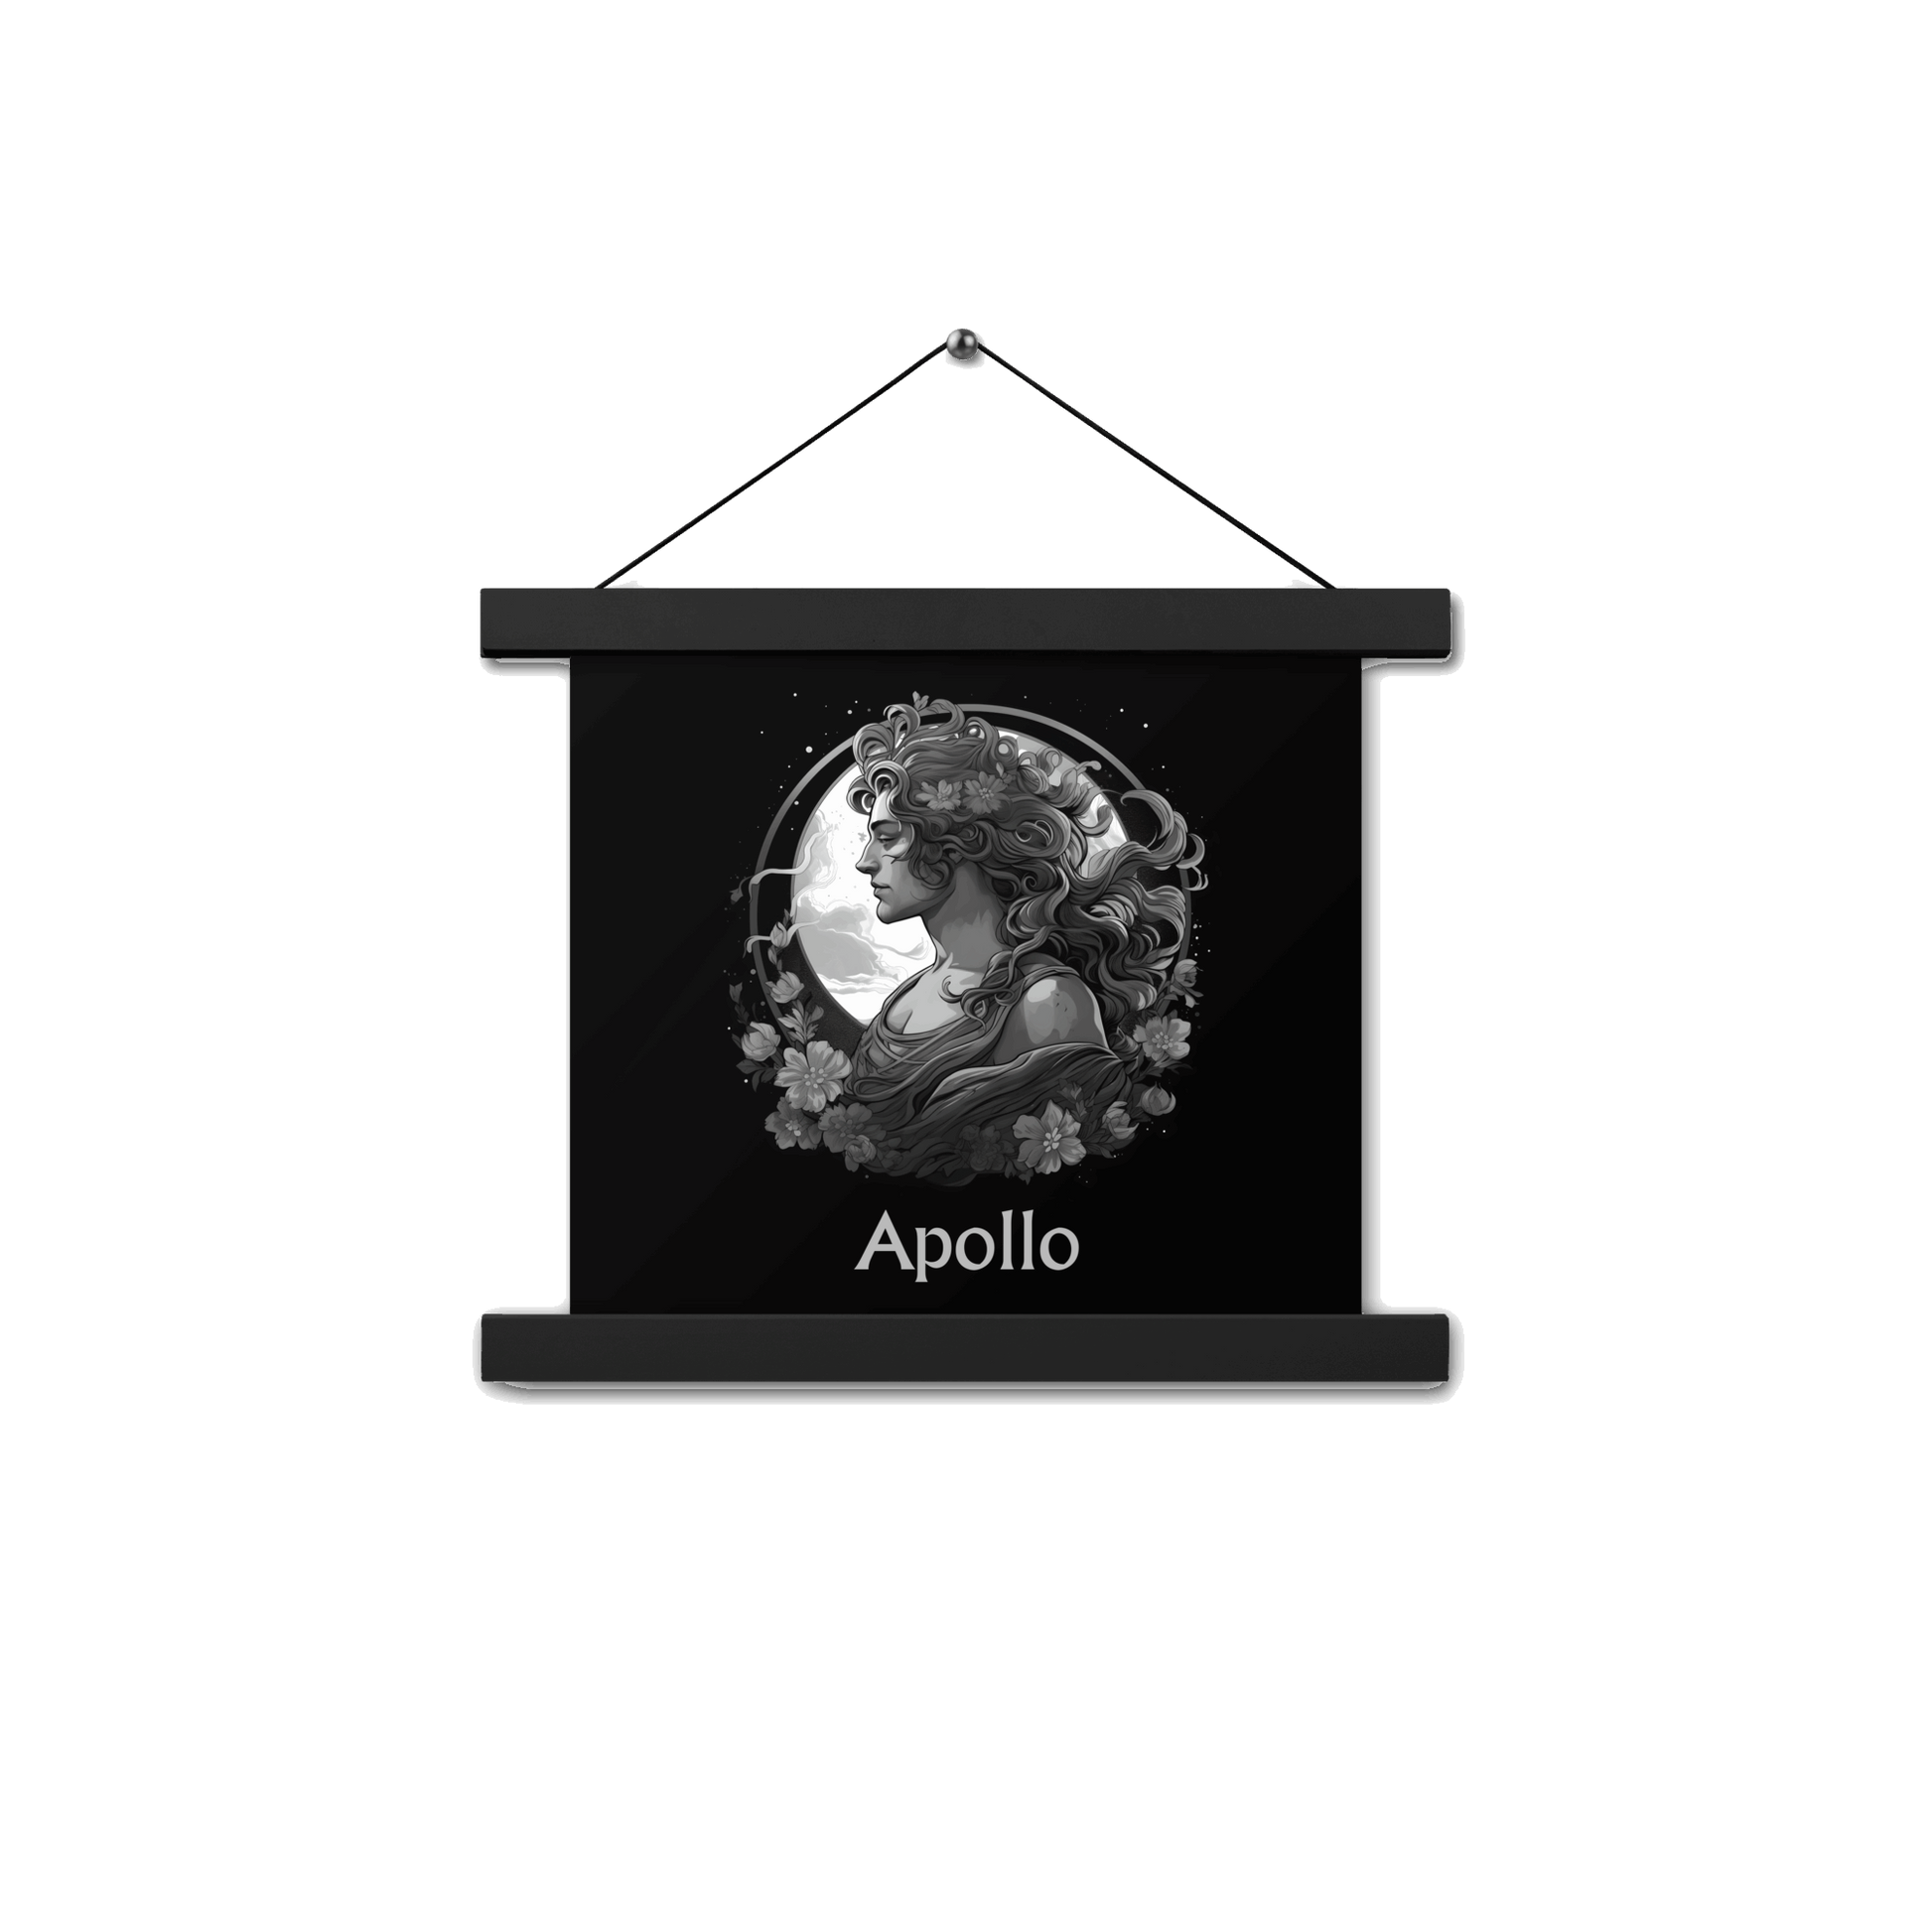 Apollo's Luminance - Black and White Hanging Wall Art High Quality Matte Poster DrawDadDraw